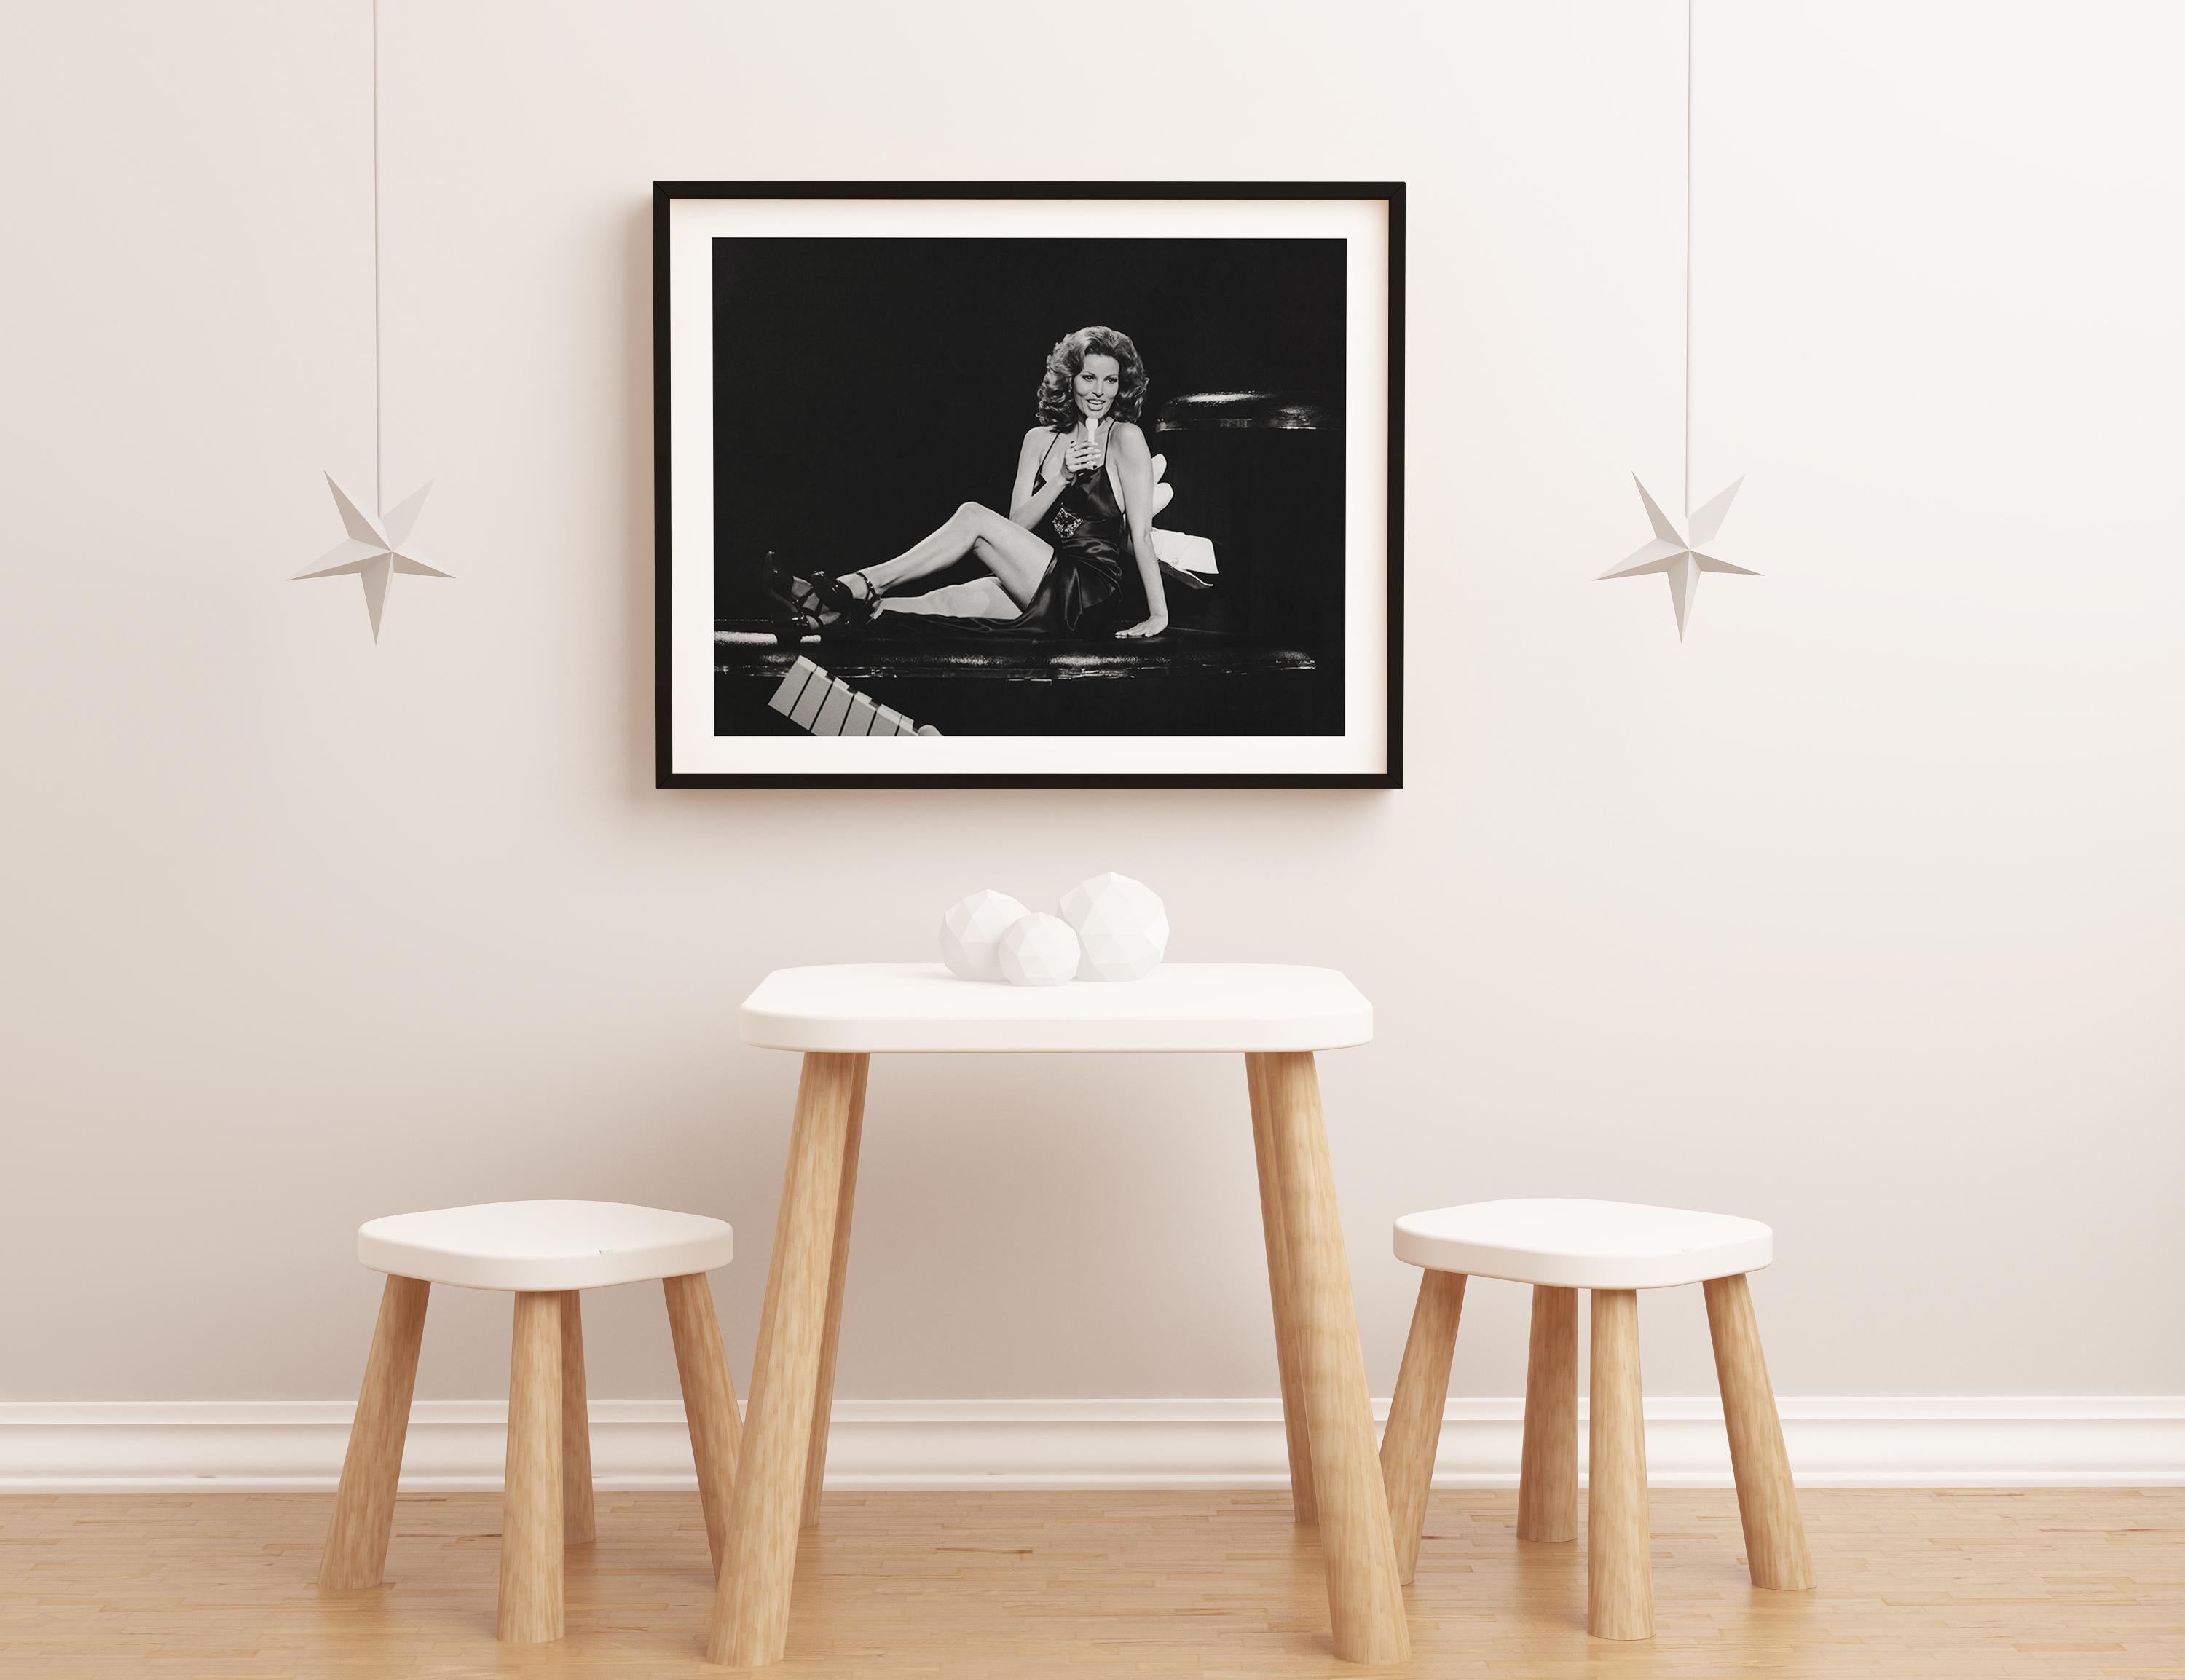 This candid black and white image features Raquel Welch posed seated in a black dress, smiling and singing on stage.

Raquel Welch is an American actress and singer. She first won attention for her role in Fantastic Voyage, after which she won a